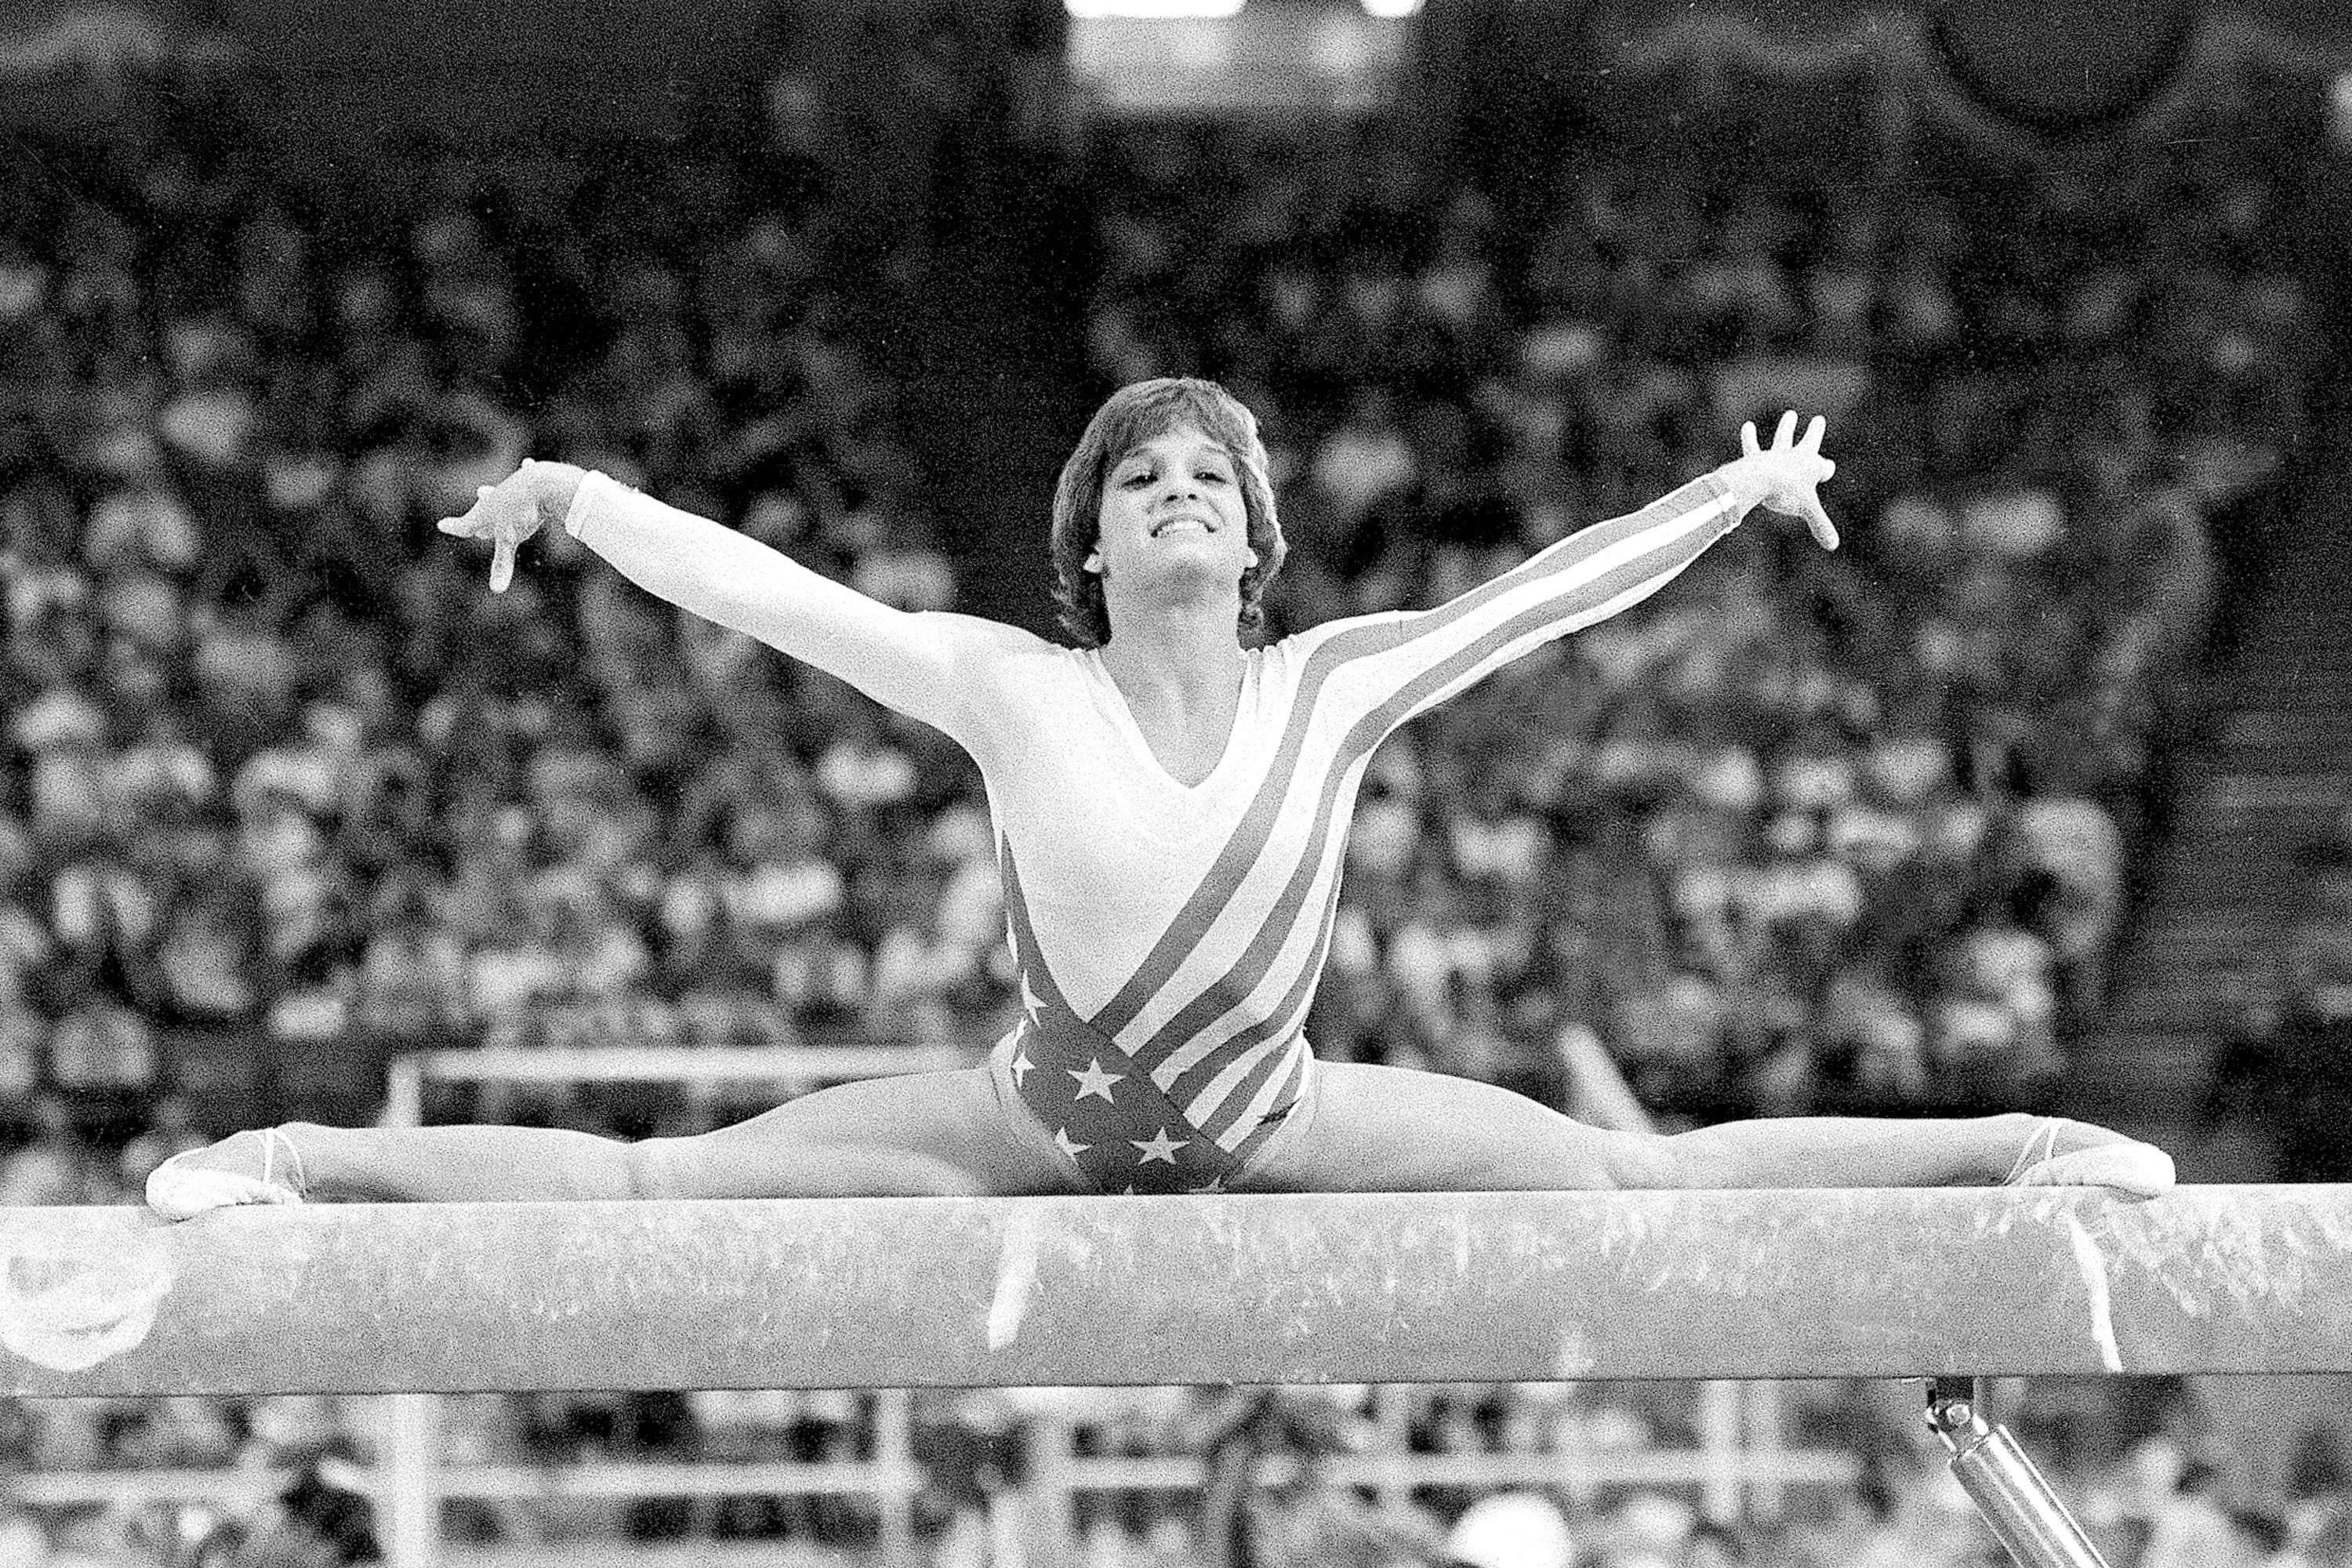 Mary Lou Retton, of the United States, performs on the balance beam during the women's gymnastics individual all-around finals at the Summer Olympics on Aug. 3, 1984